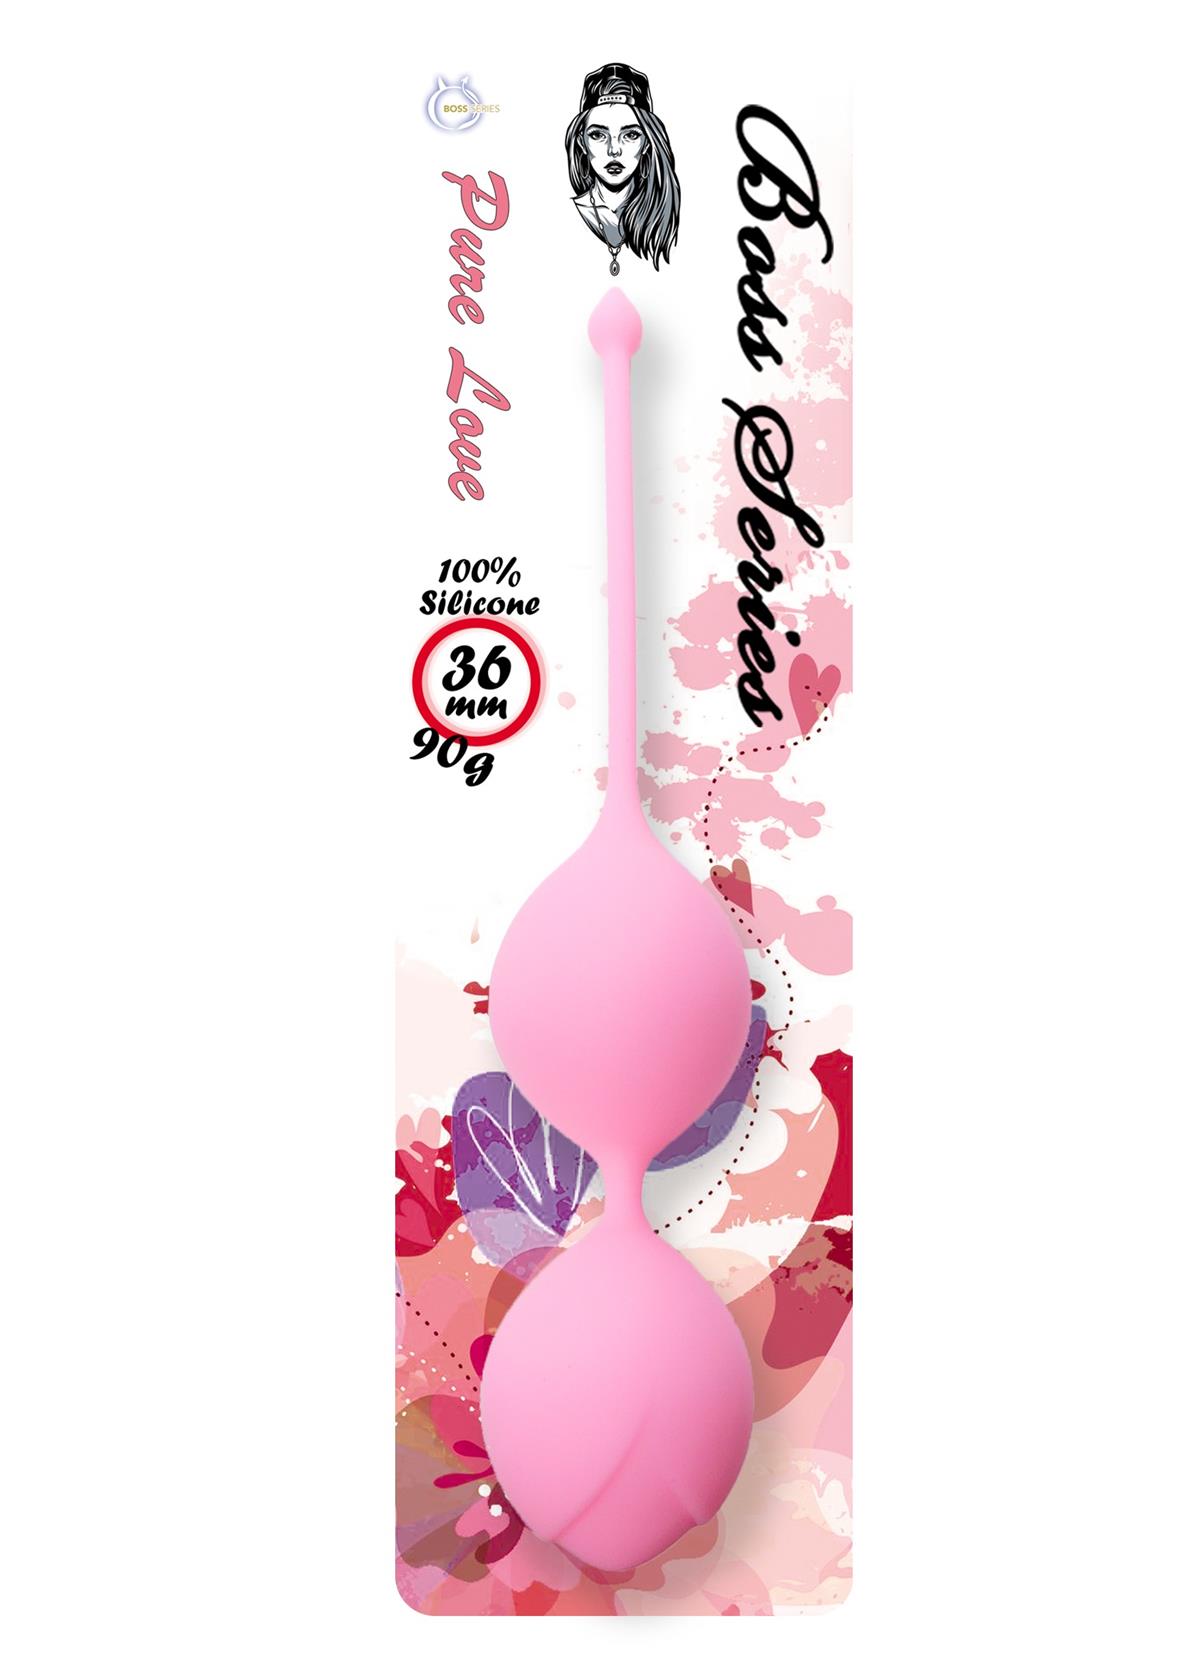 Bossoftoys - 75-00004 - Silicone Kegel Balls - 29 mm 90g Pink - strong blister